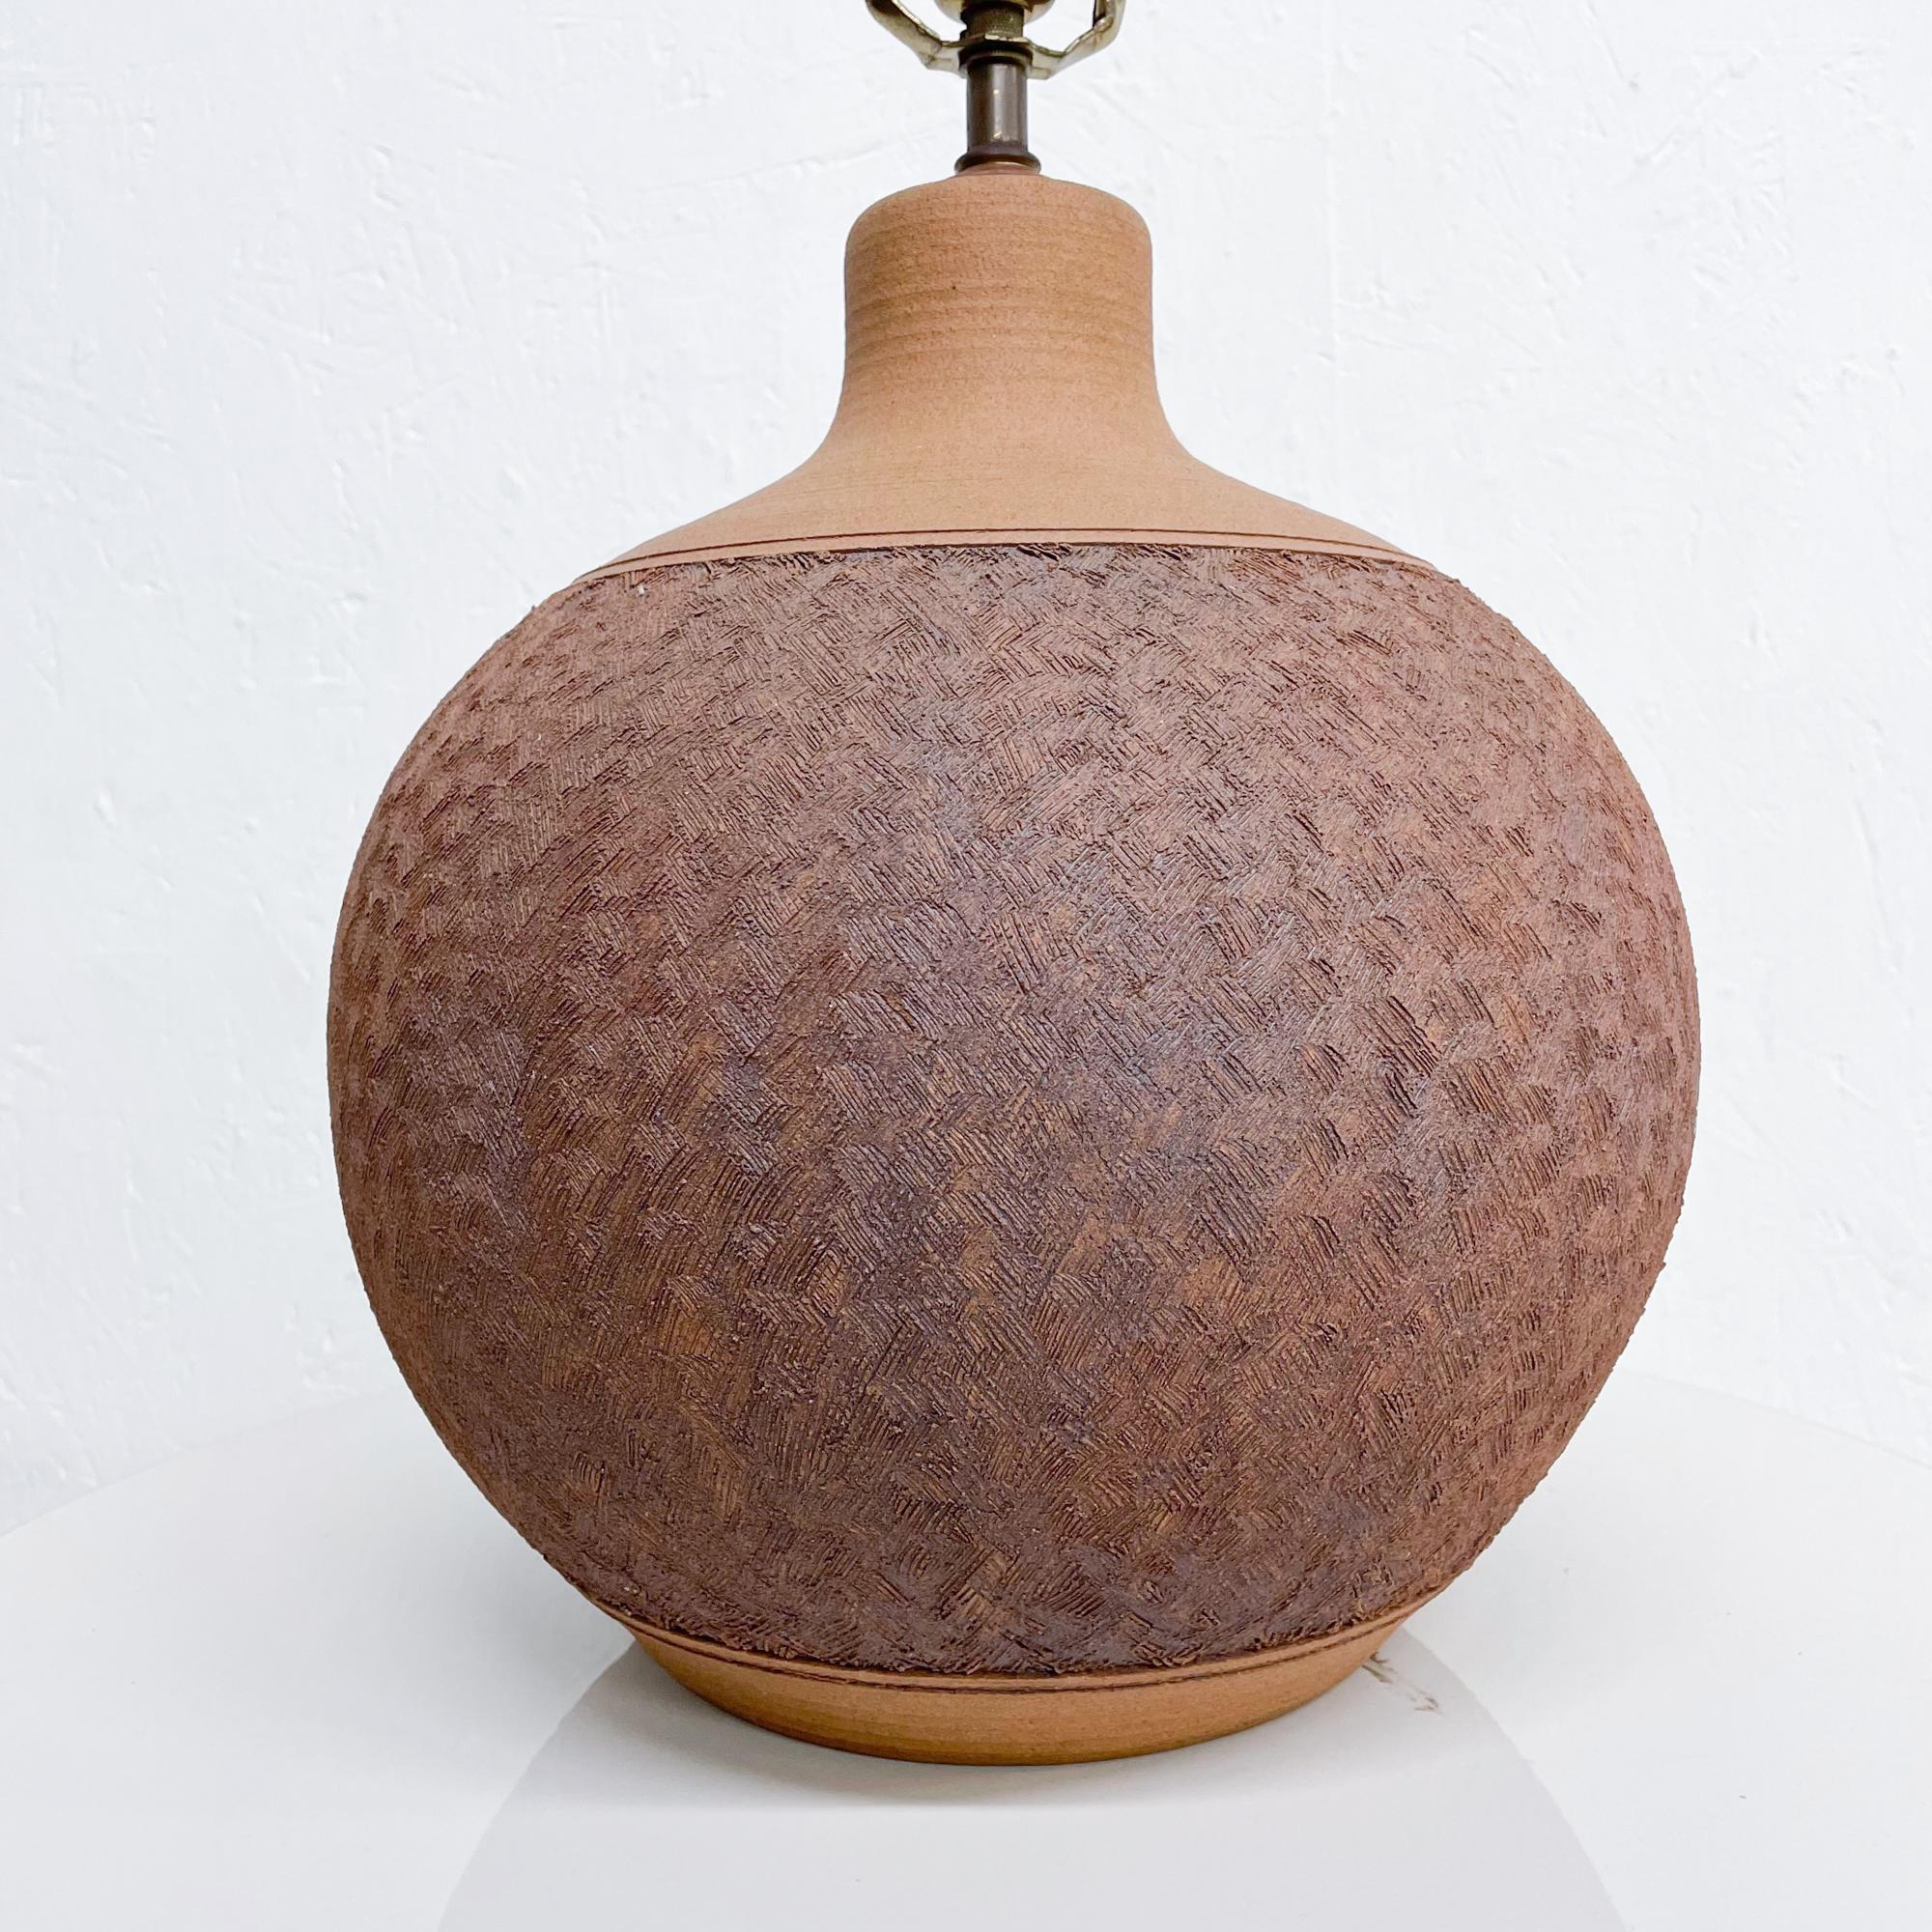 Bulbous texturized table lamp Mid-Century Modern Pottery signed Brown circa 1970s
Unglazed. In the style of David Cressey USA.
Measures: 18 H to the base of the socket x 15 in diameter
Original unrestored vintage condition. Refer to images